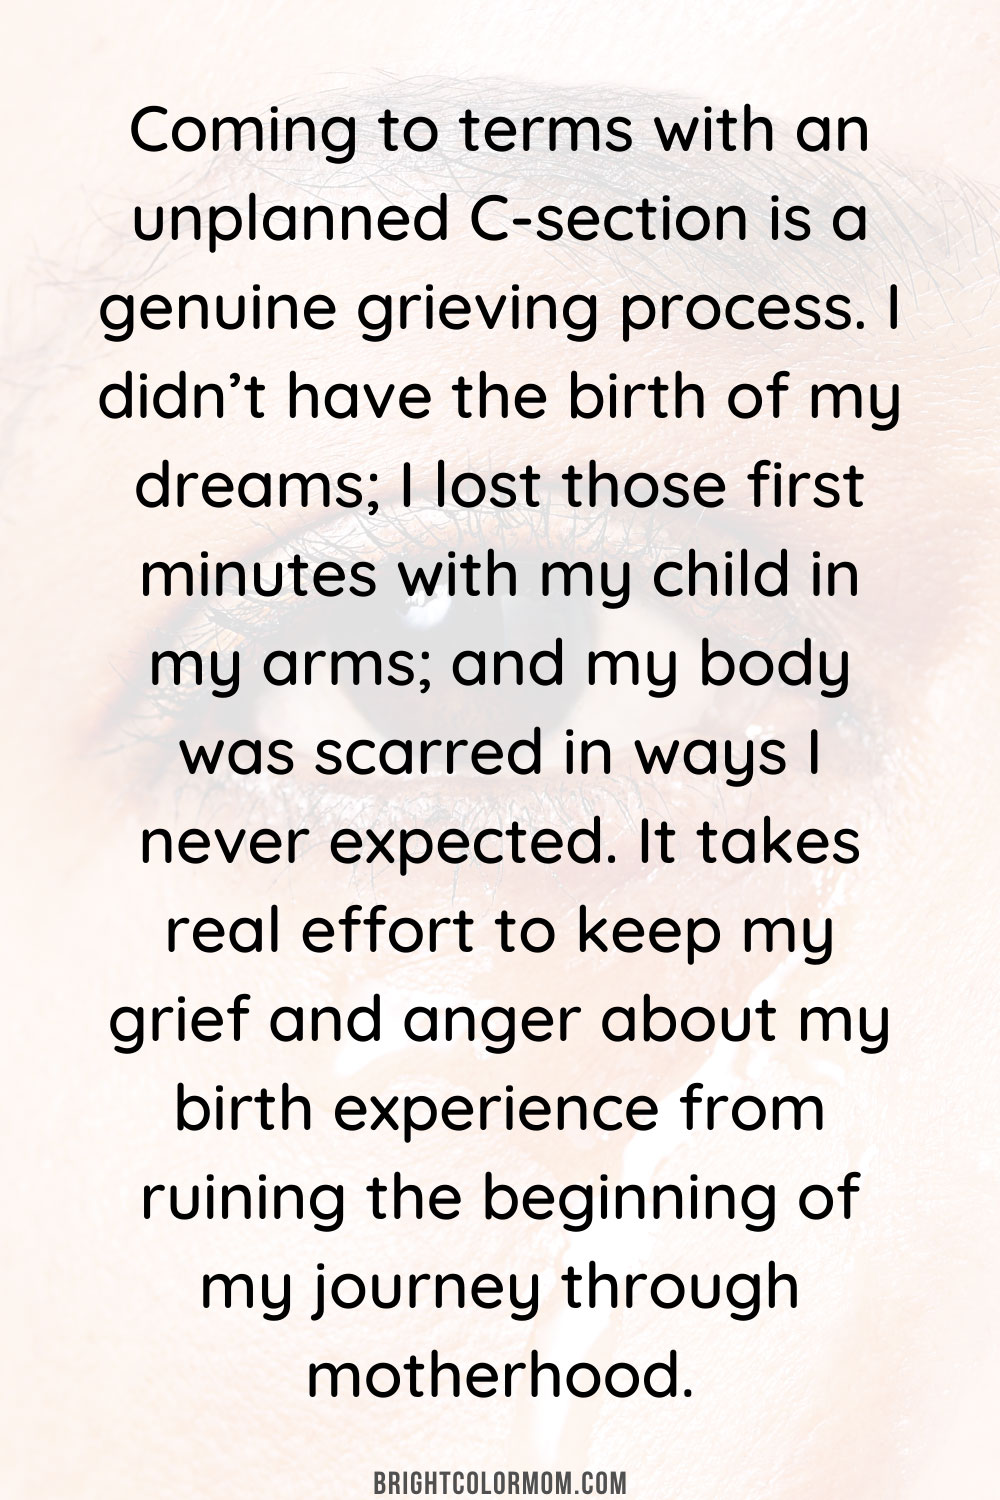 Coming to terms with an unplanned C-section is a genuine grieving process. I didn’t have the birth of my dreams; I lost those first minutes with my child in my arms; and my body was scarred in ways I never expected. It takes real effort to keep my grief and anger about my birth experience from ruining the beginning of my journey through motherhood.